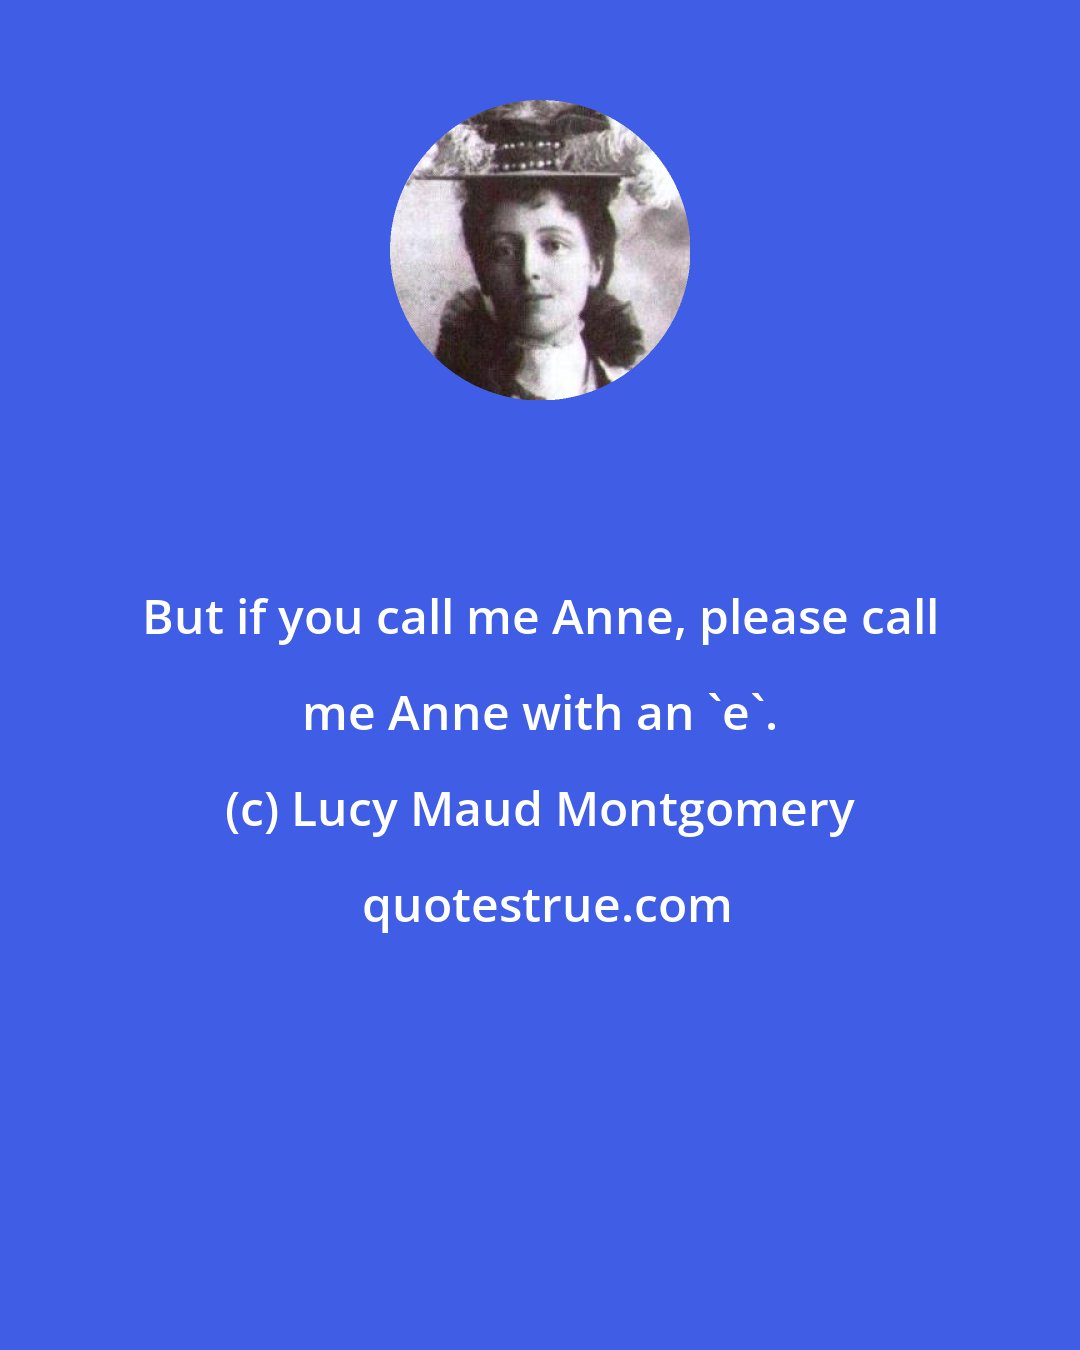 Lucy Maud Montgomery: But if you call me Anne, please call me Anne with an 'e'.